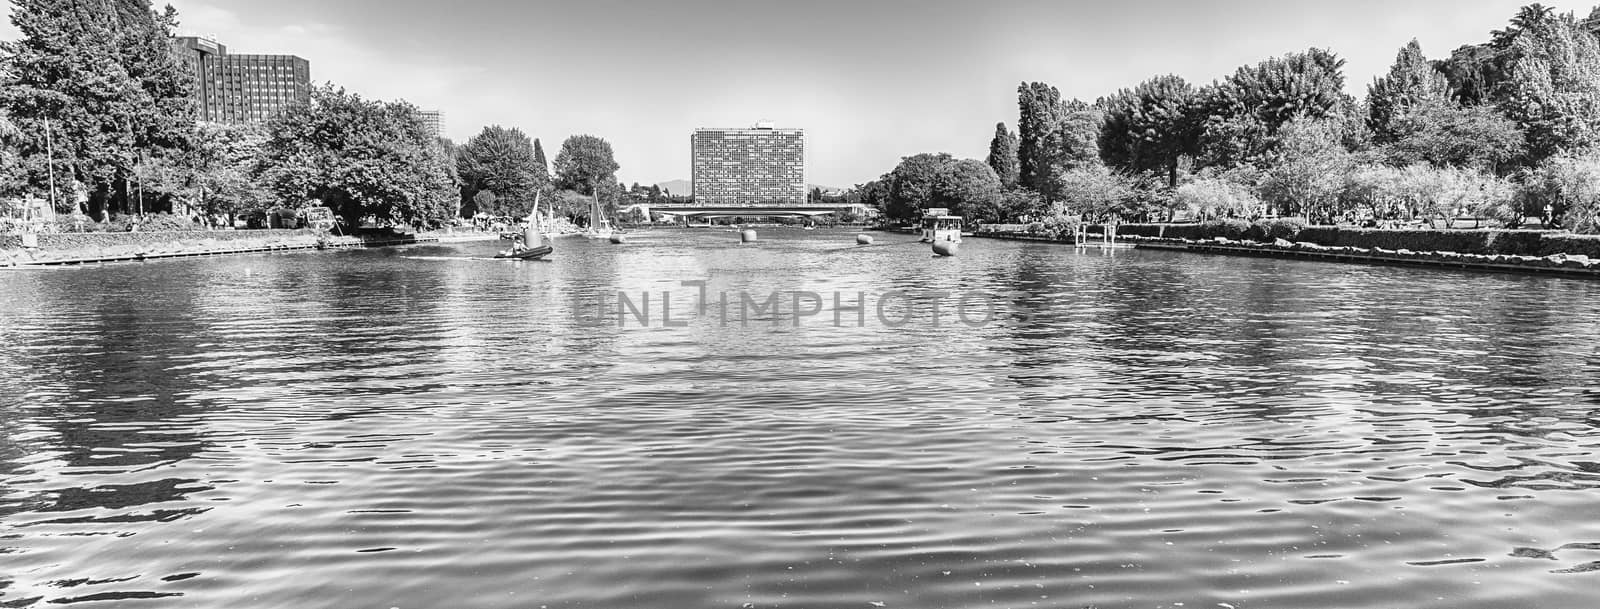 Scenic view over the lake of EUR in Rome, Italy by marcorubino